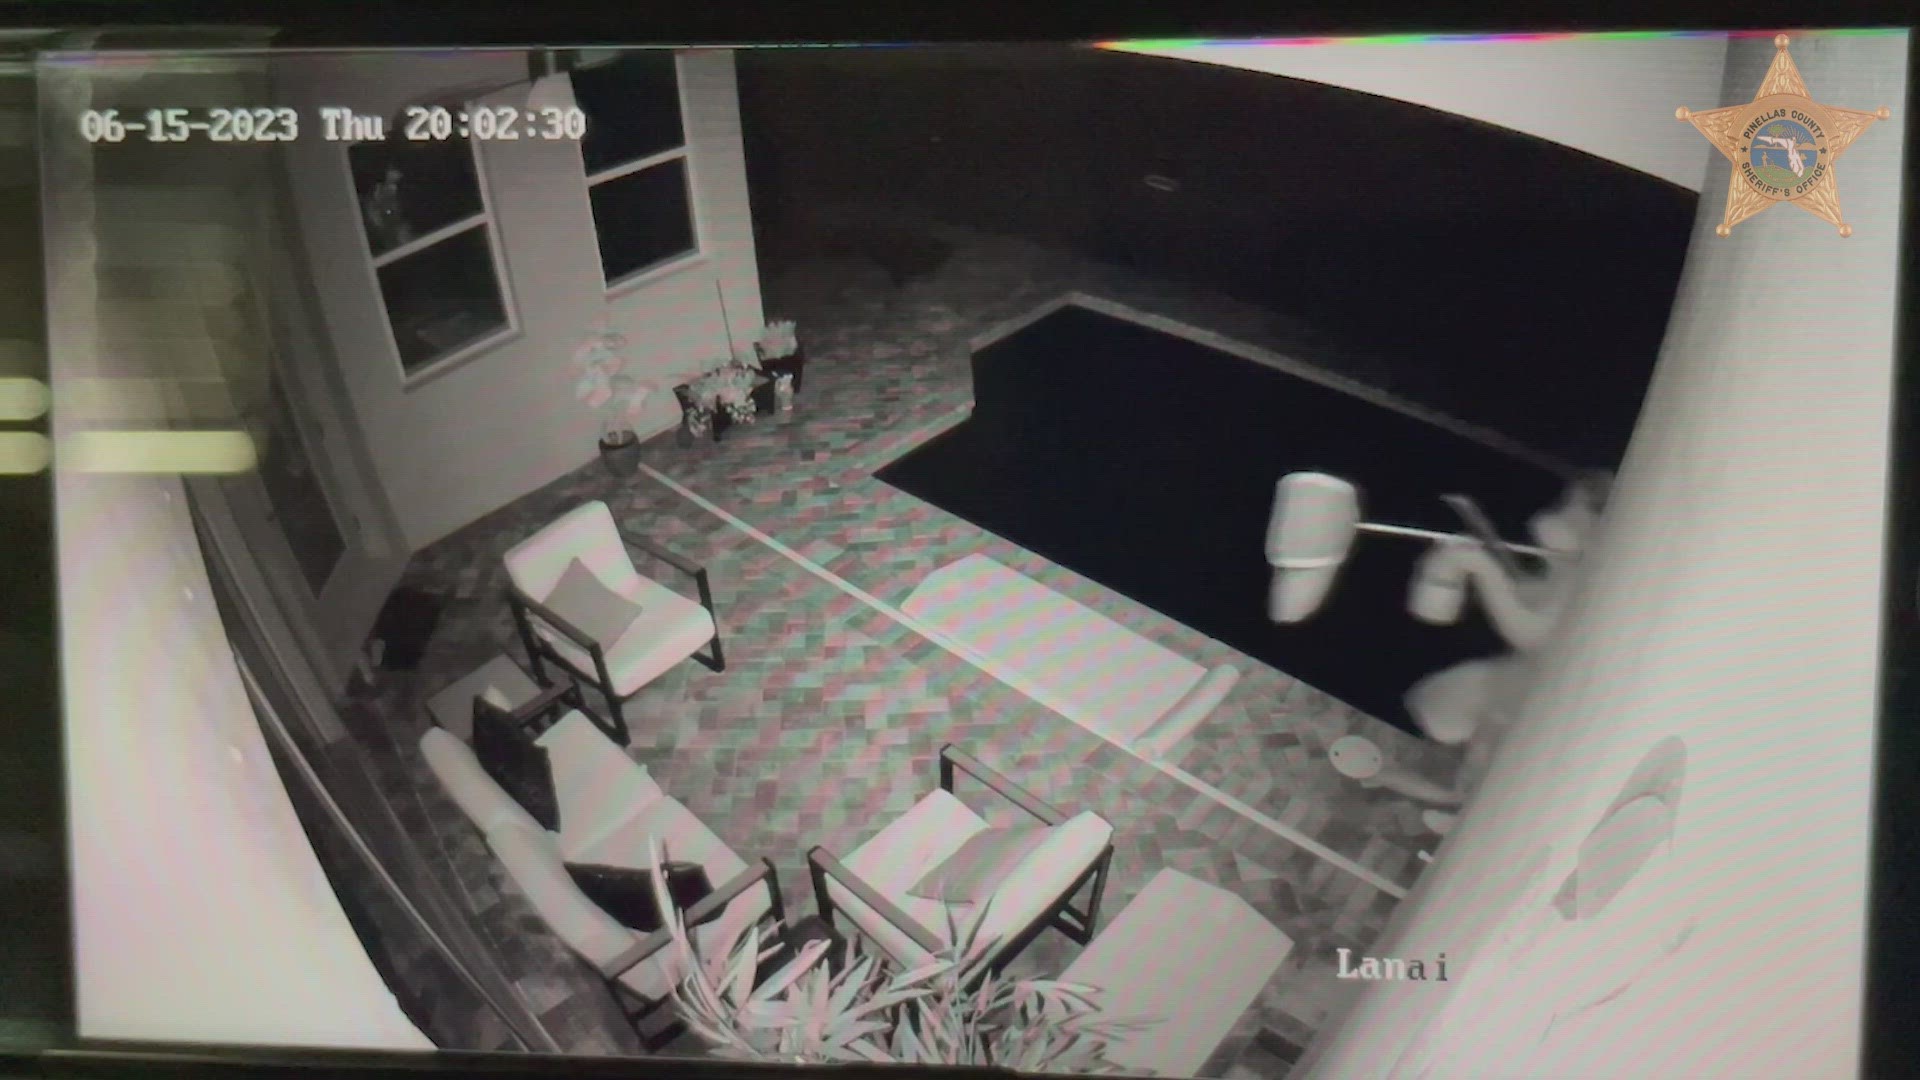 Security camera footage in the lanai shows the pool tech startled by the shots and then running away.